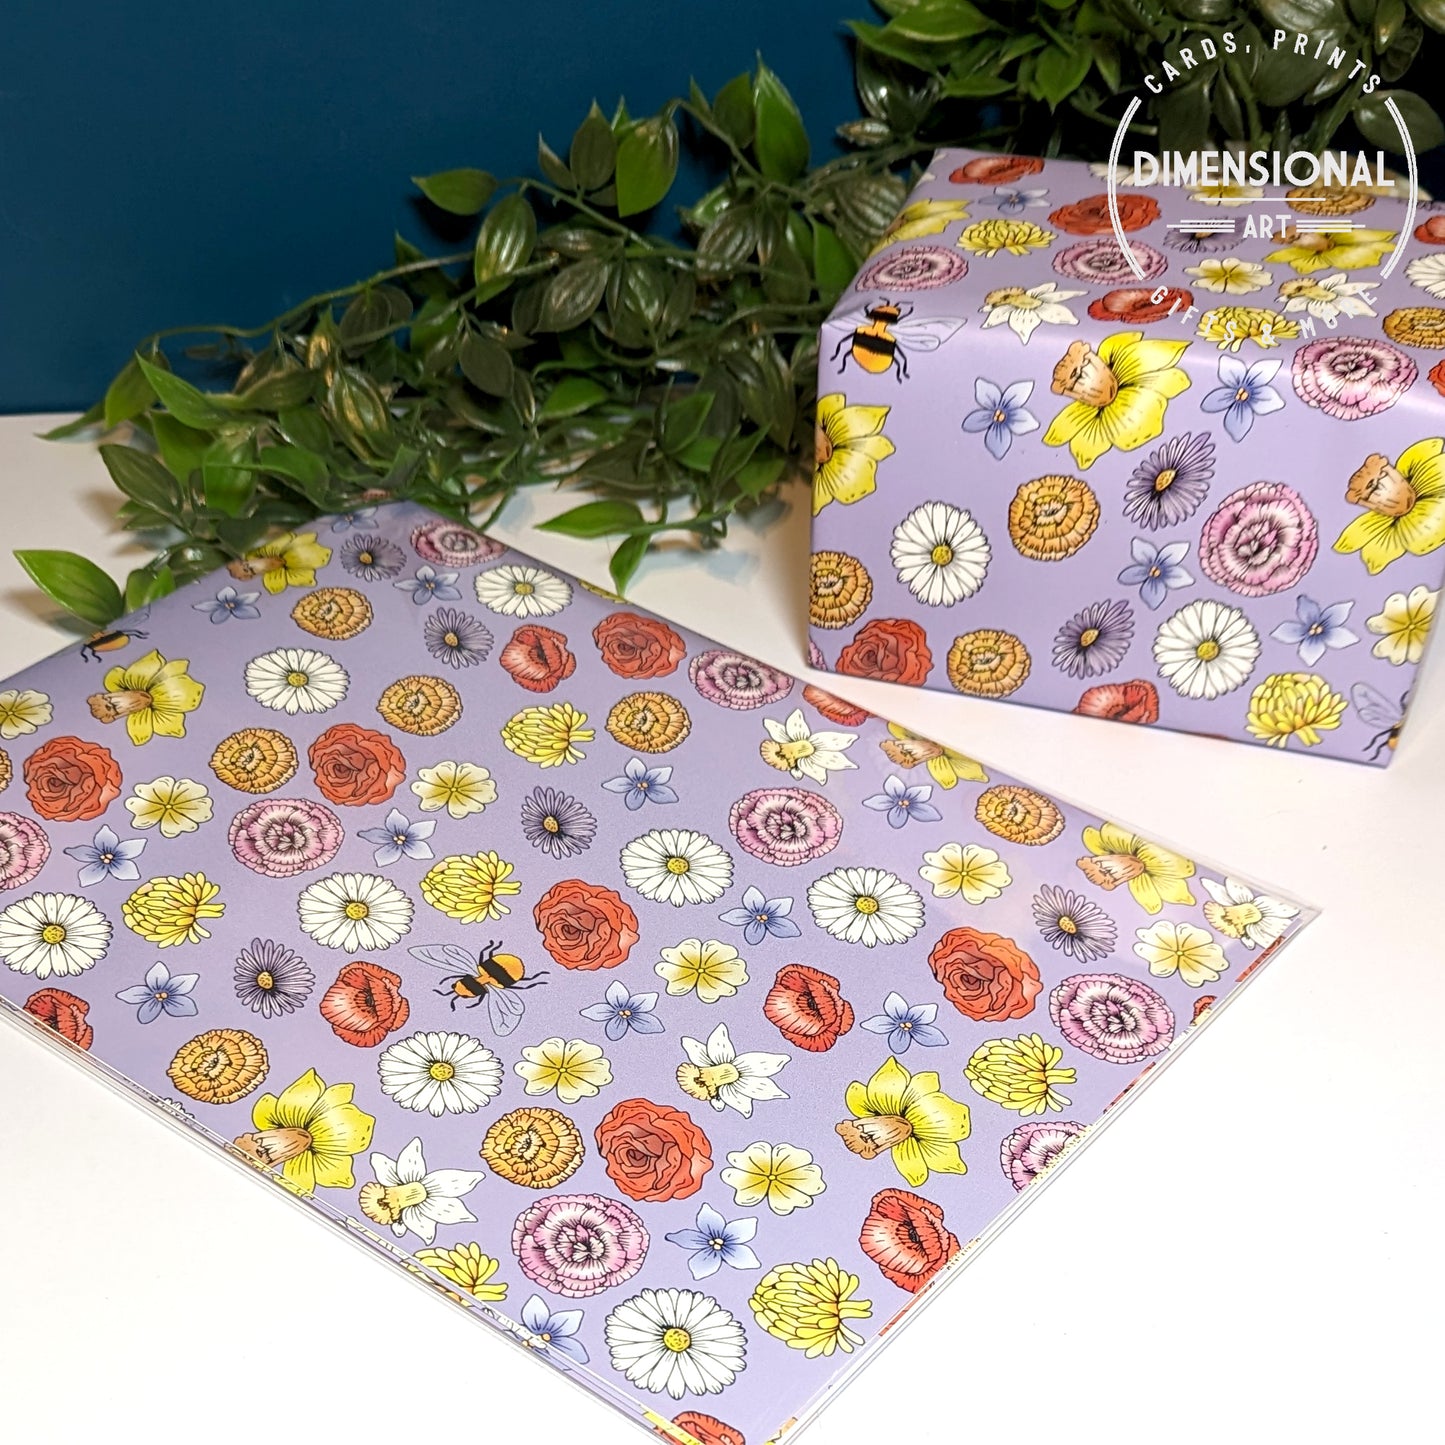 Flowers and Bees Gift Wrap and Tags (Wrapping Paper)